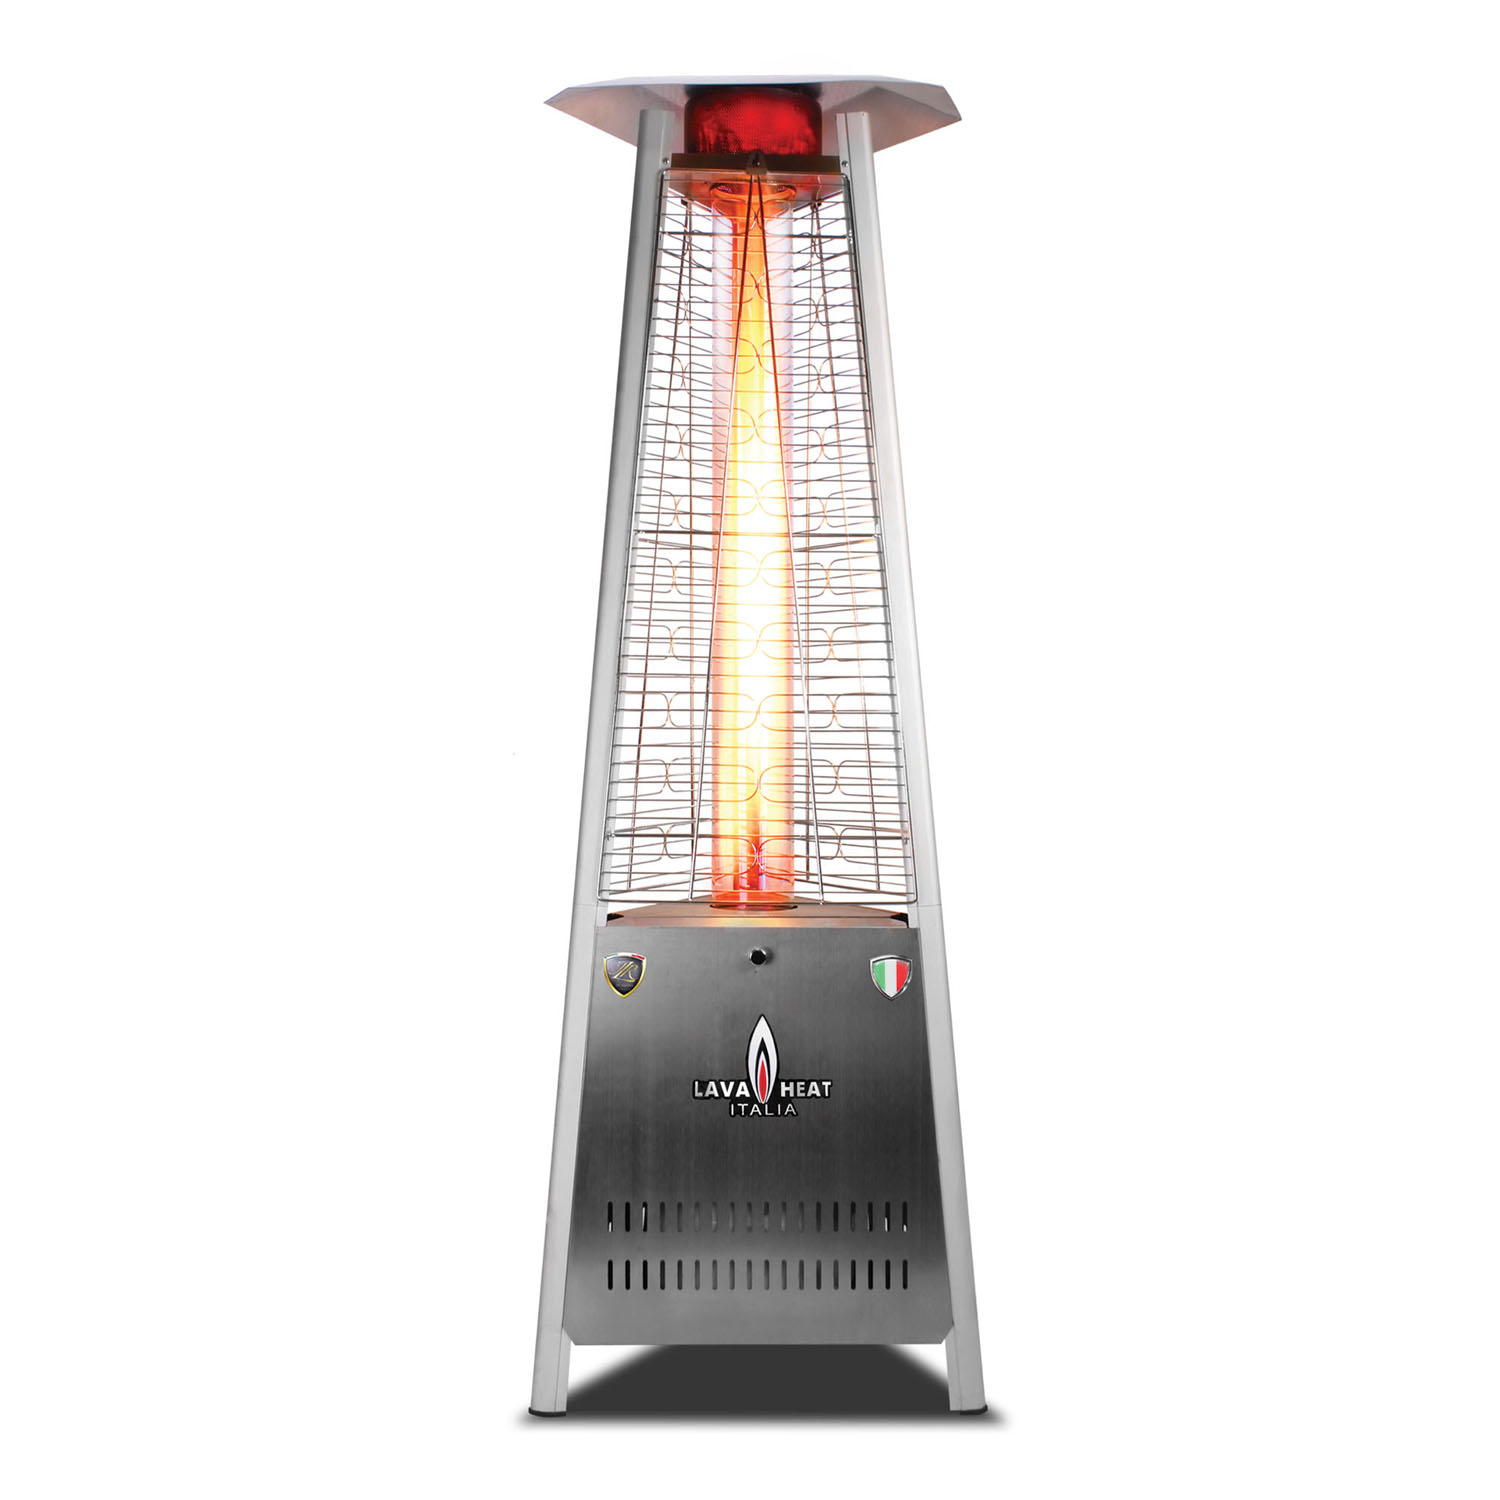 The Lava Heat Italia A-Line 6 foot Commercial Flame Tower Heater, Manual Ignition, Stainless Steel Finish, Liquid Propane